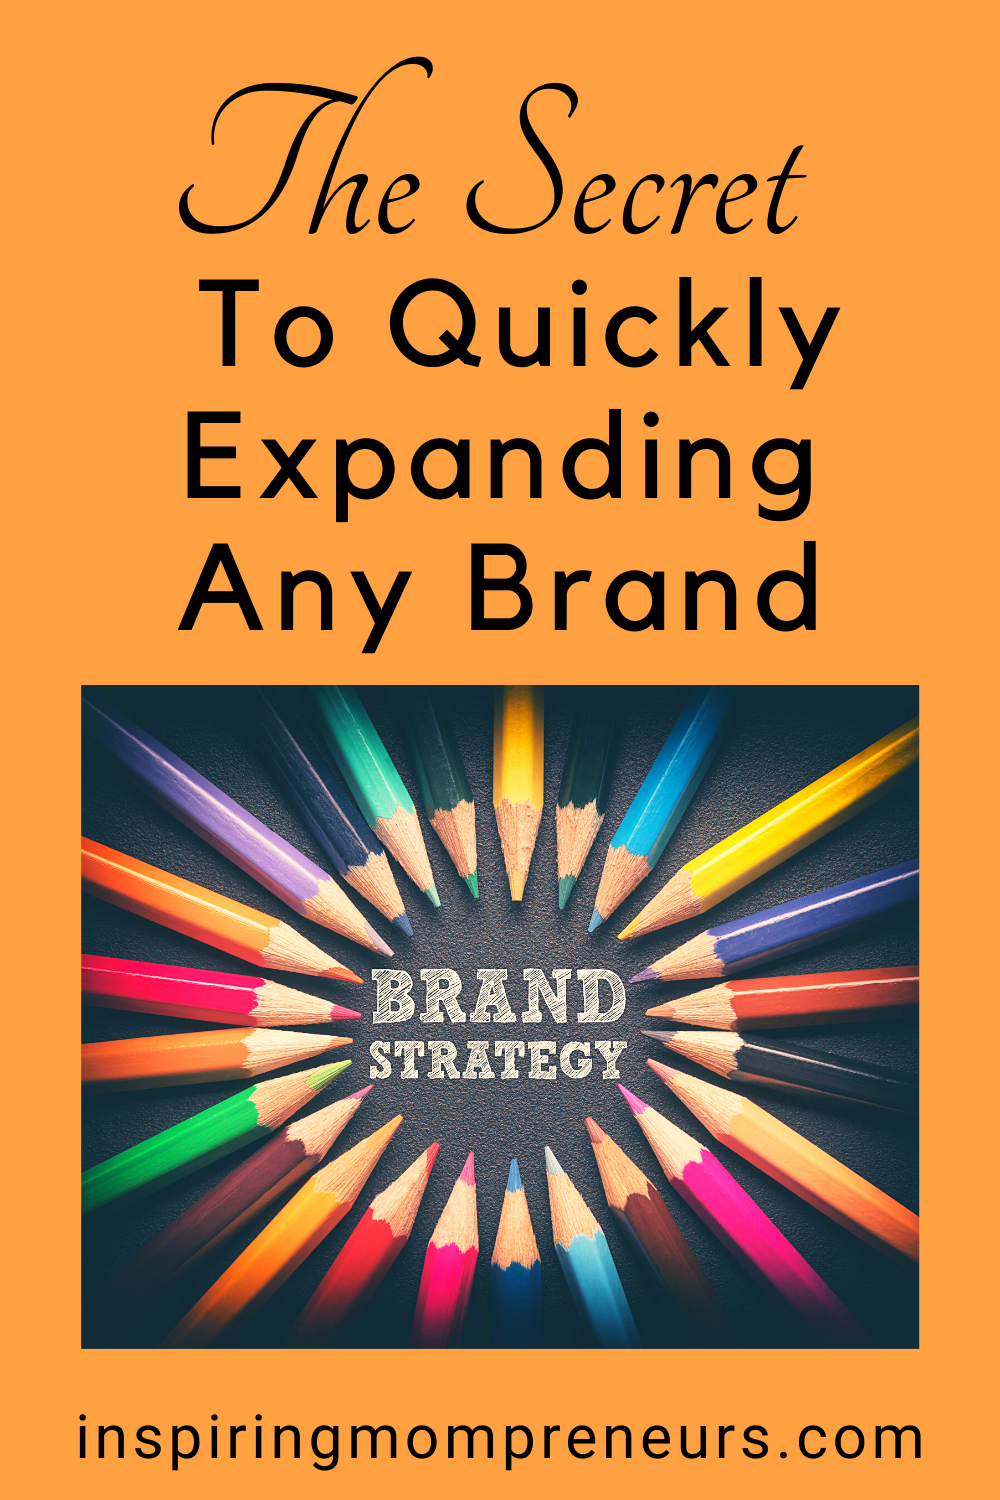 Let's take a look at four of the top secrets to quickly expanding any brand, so you can enjoy these benefits in your business sooner rather than later.